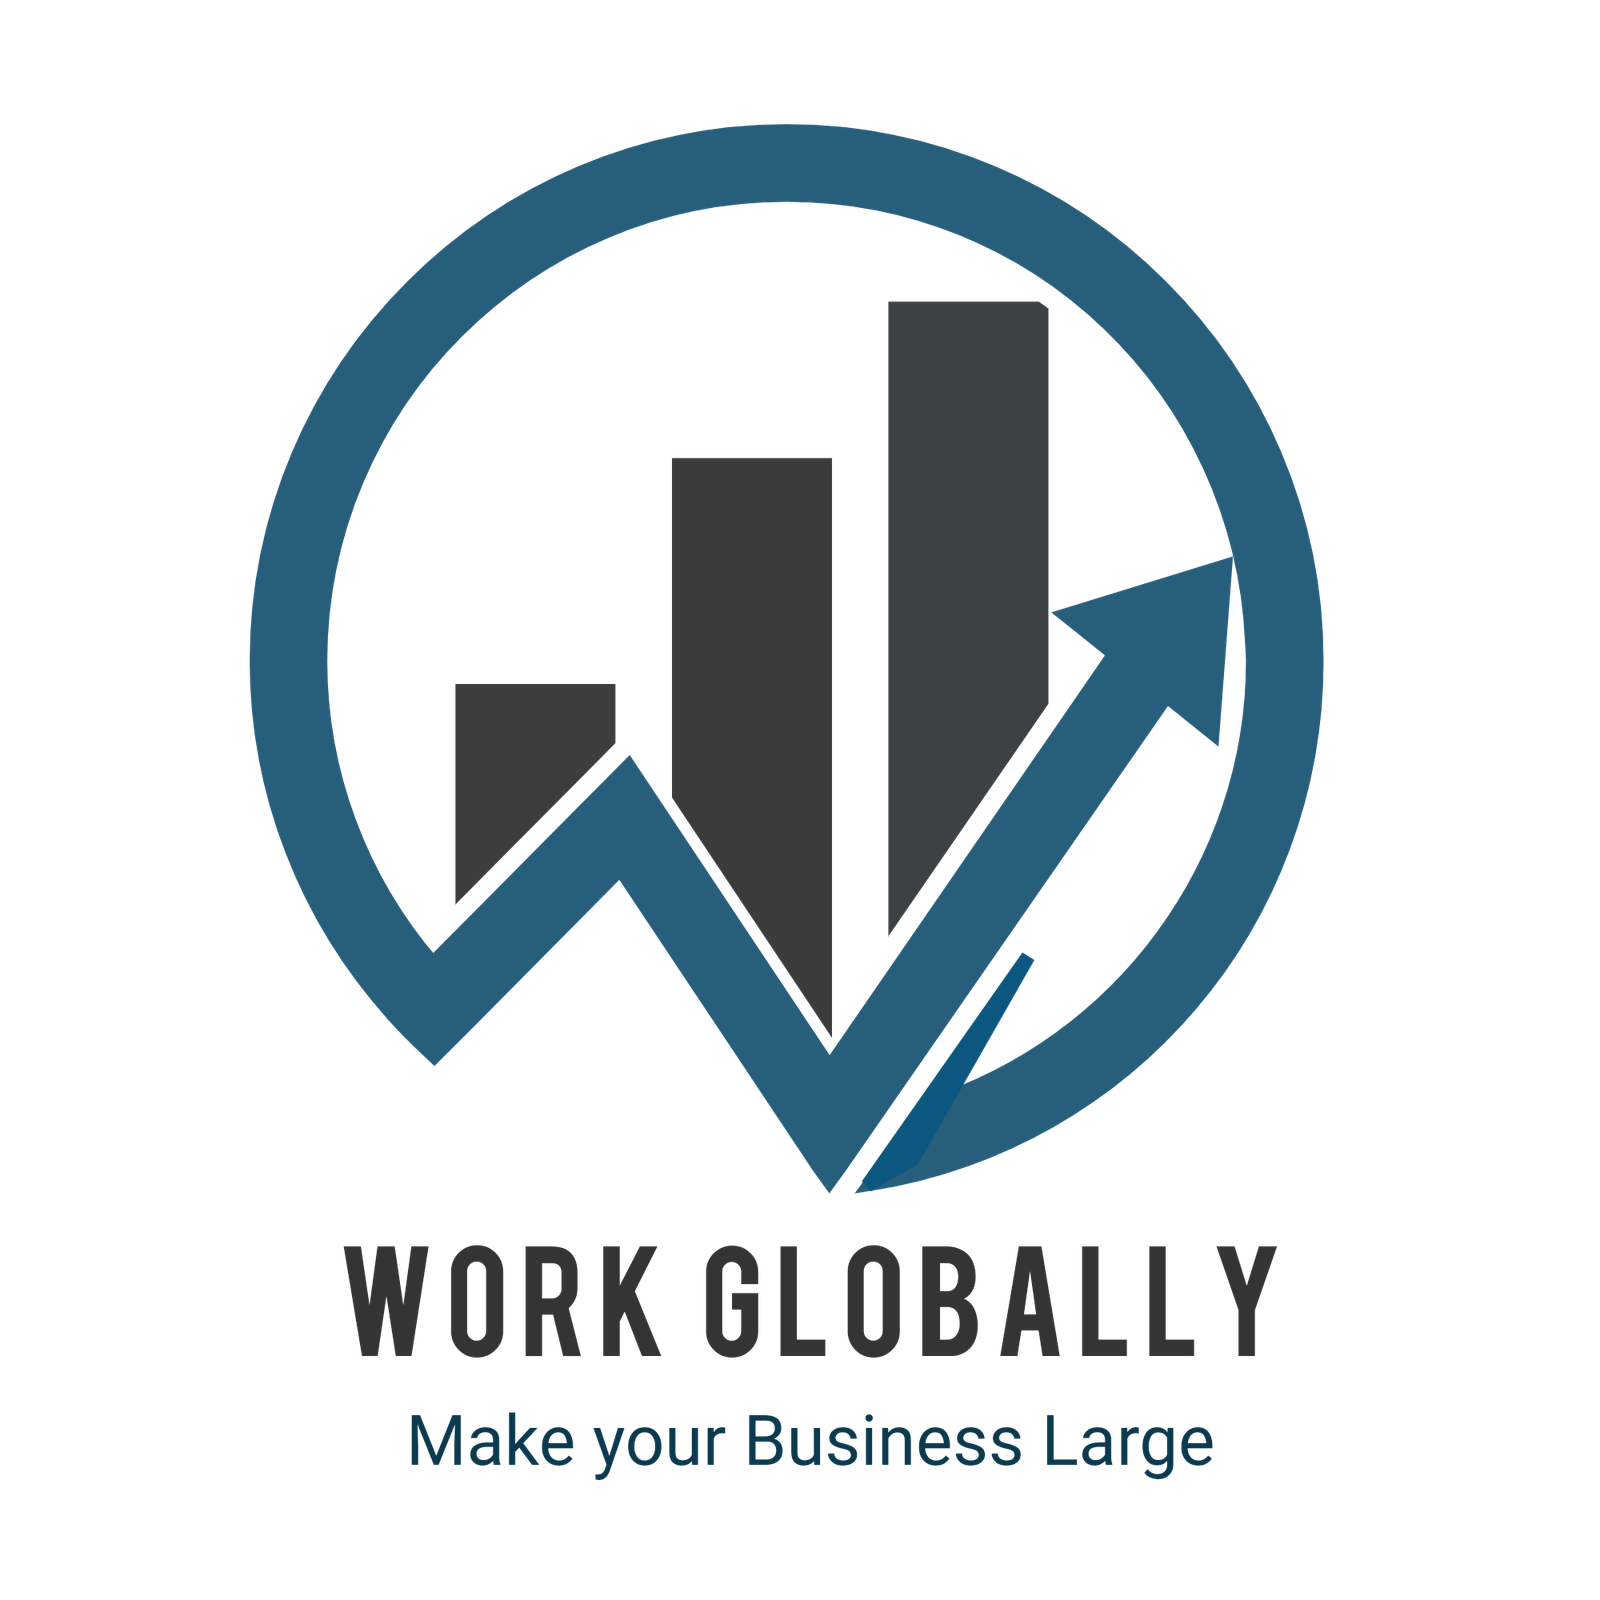 About Us - Work Globally